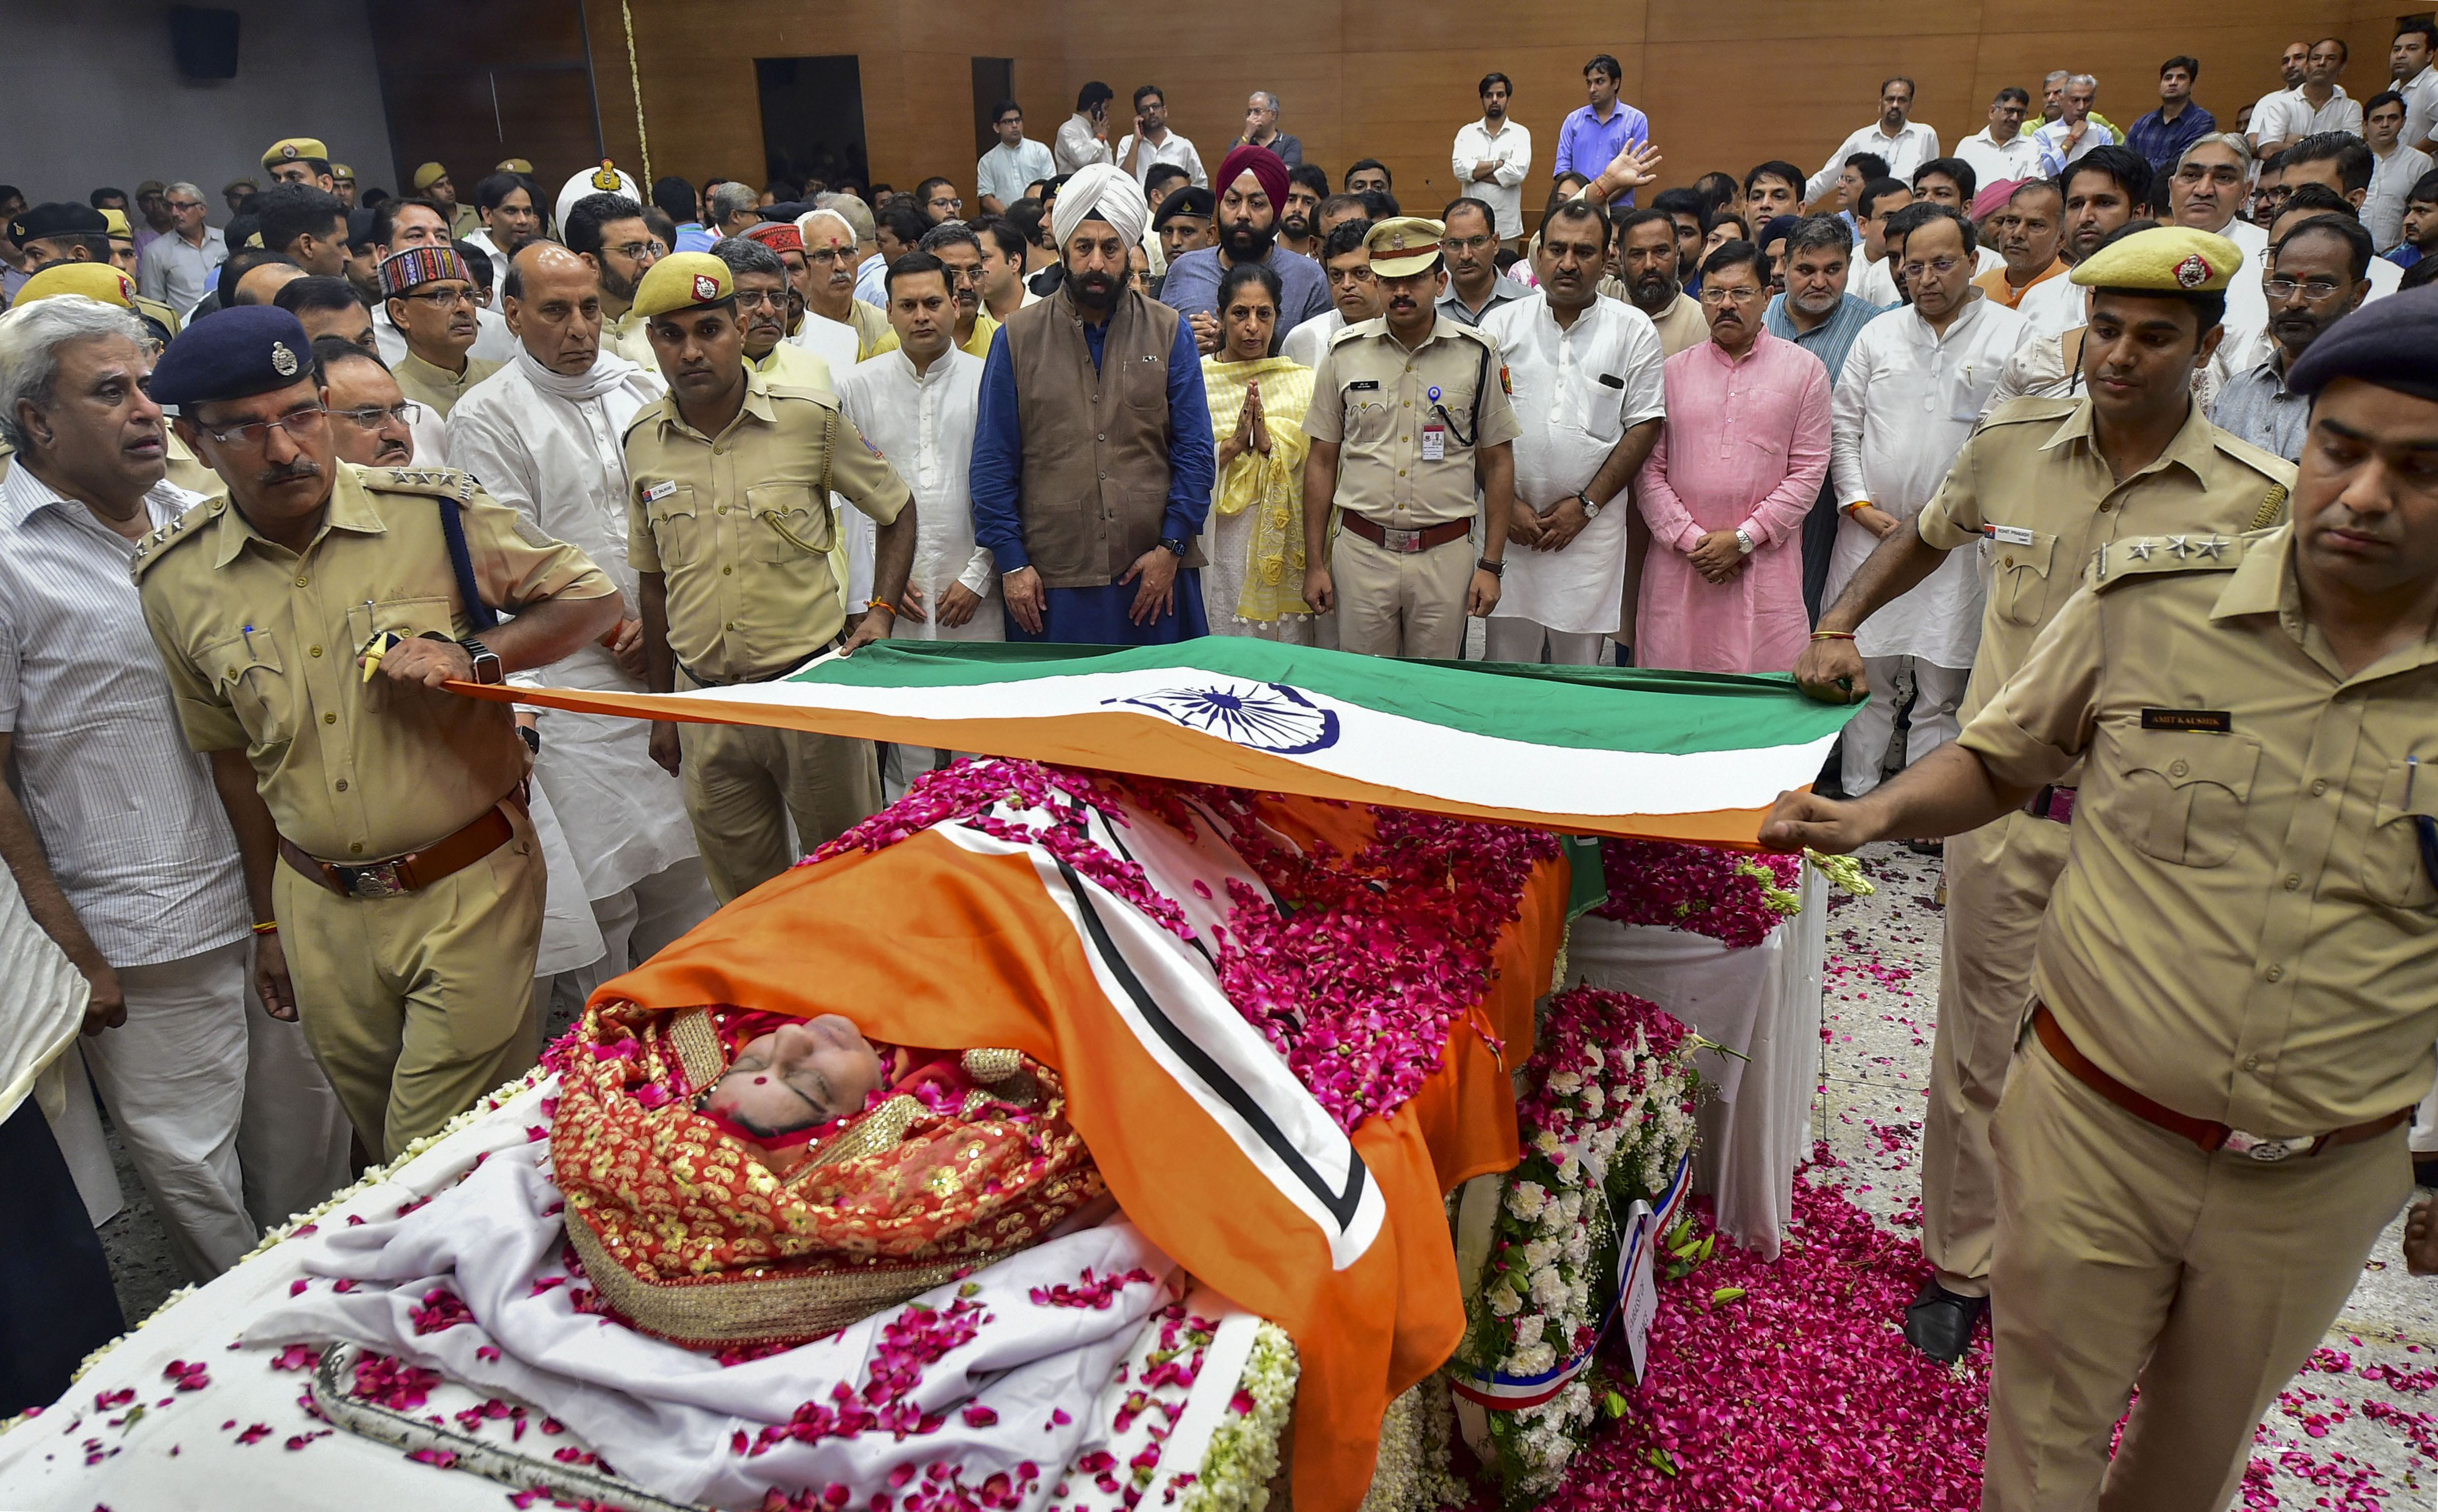 Sushma Swaraj, last rites, cremated, state honours, Prime Minister Narendra Modi, BJP president Amit Shah, leader of opposition, chief minister, The Federal, English news website